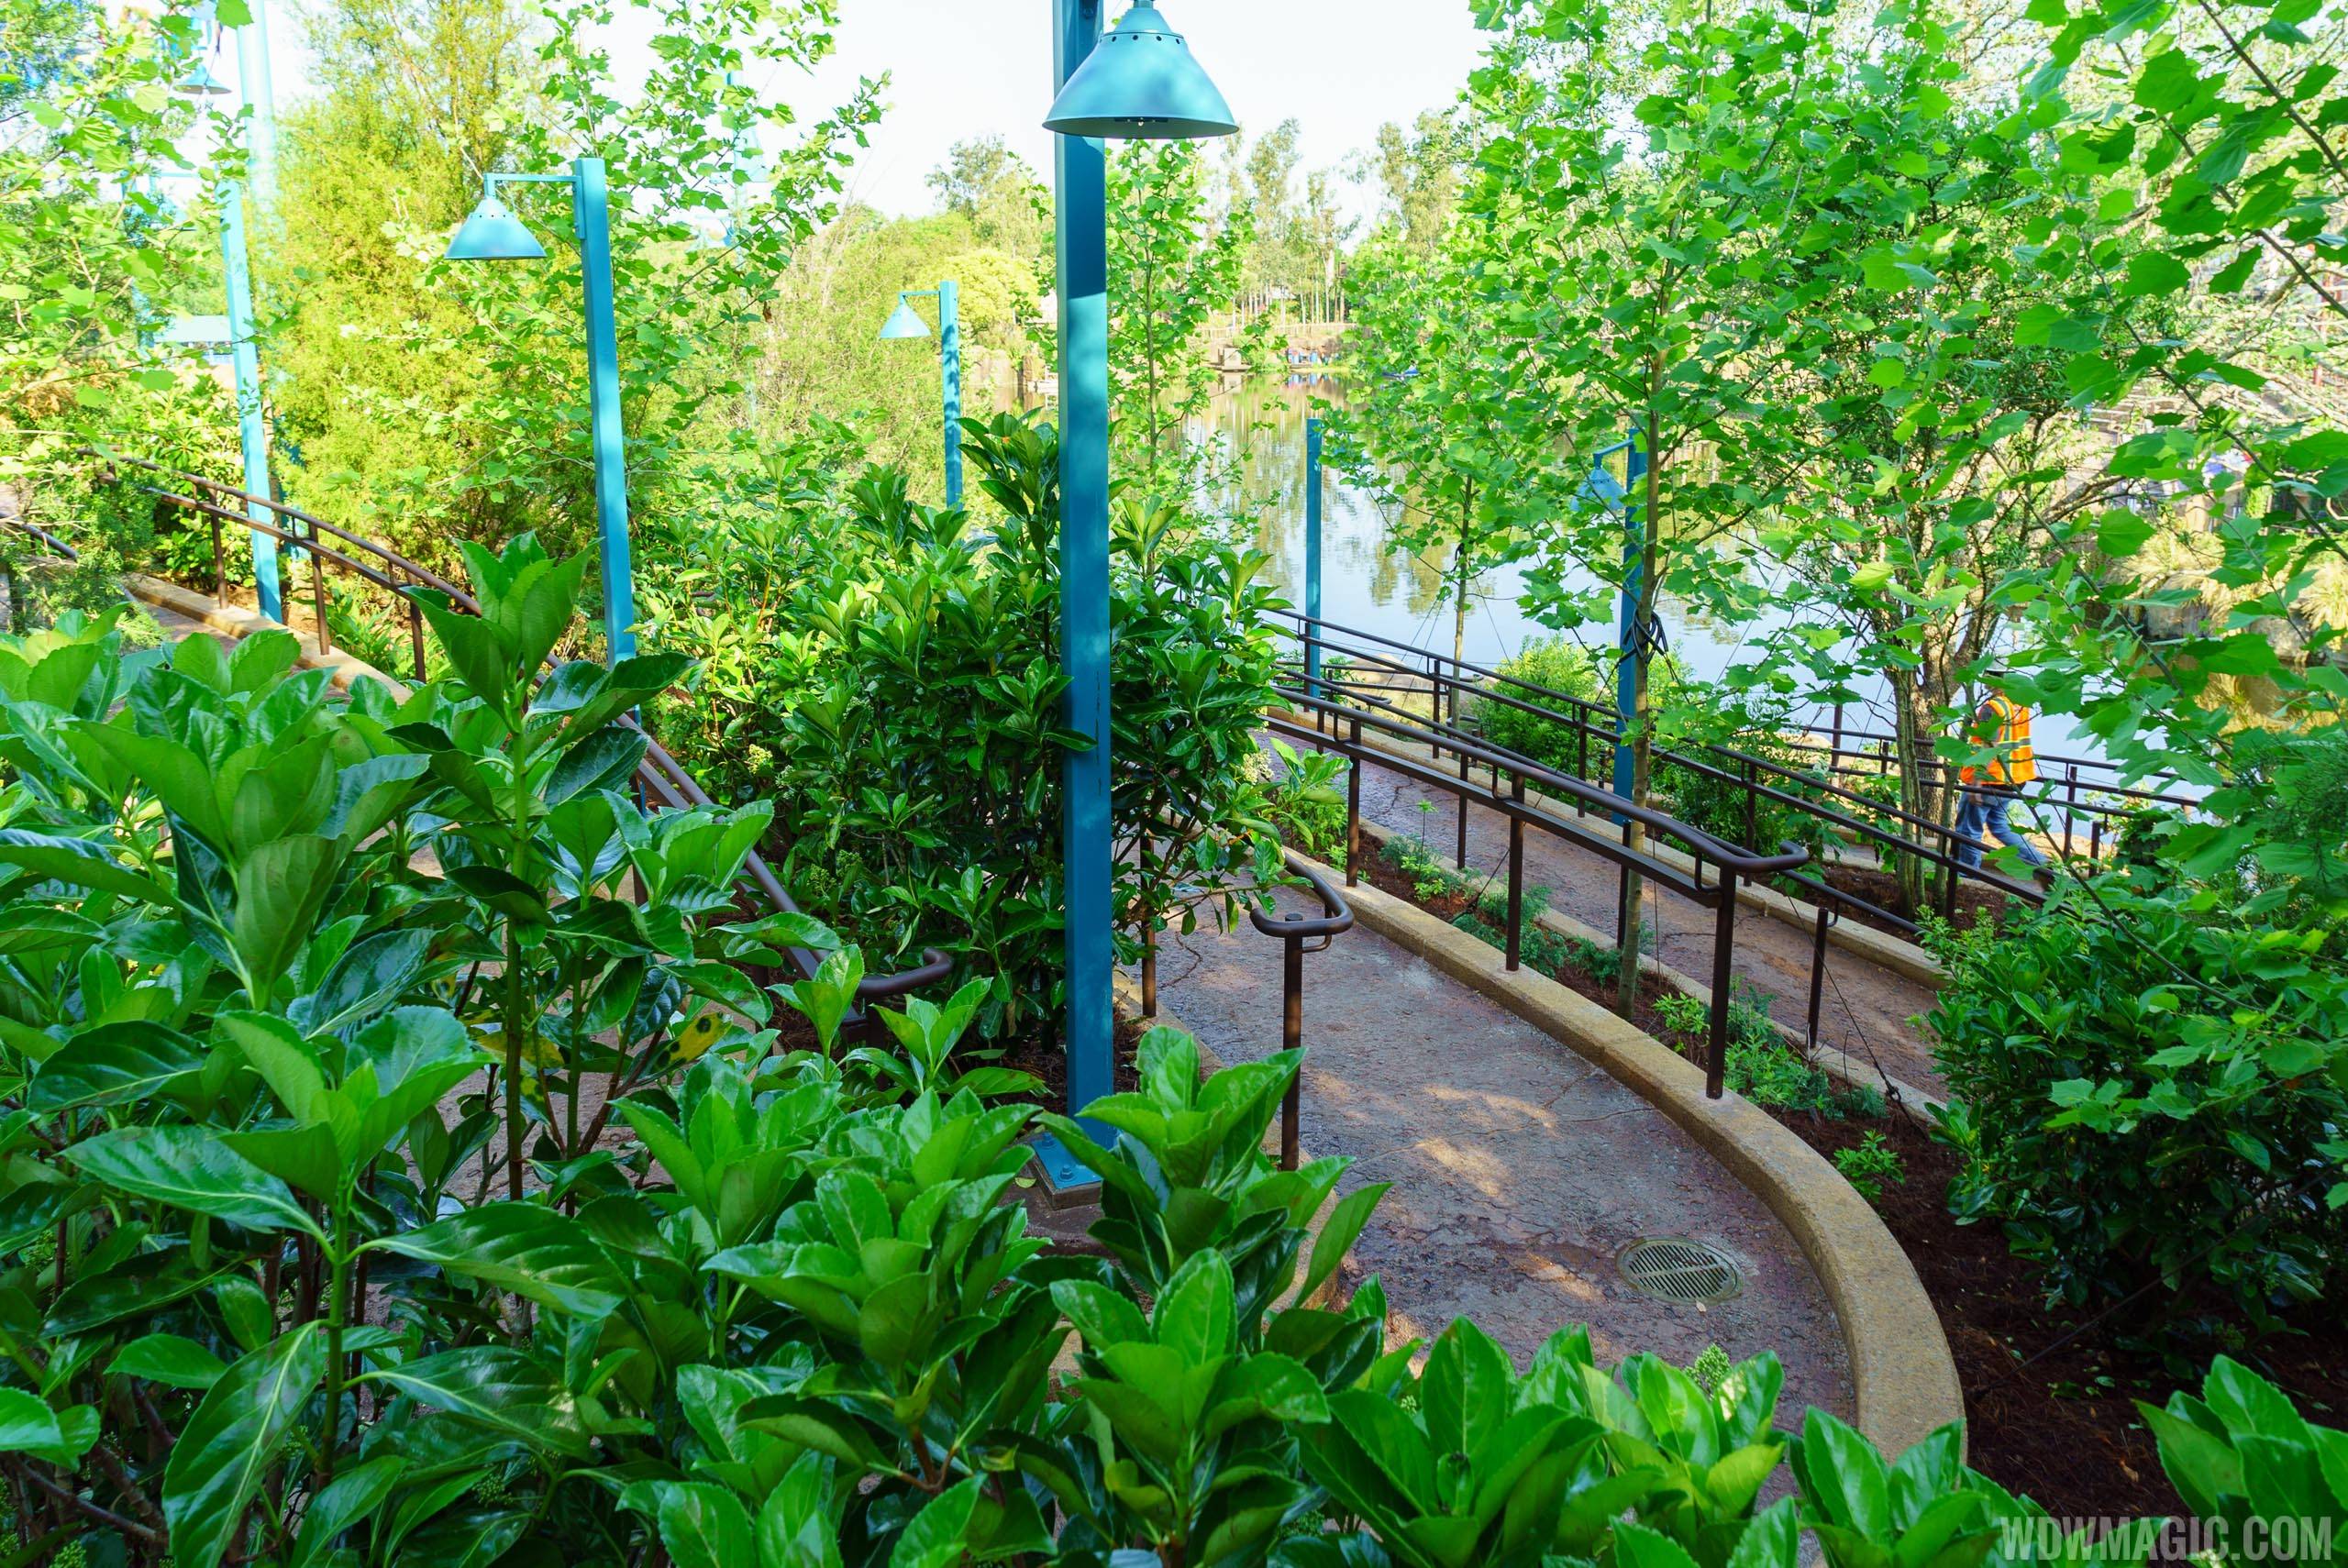 Rivers of Light viewing areas completed